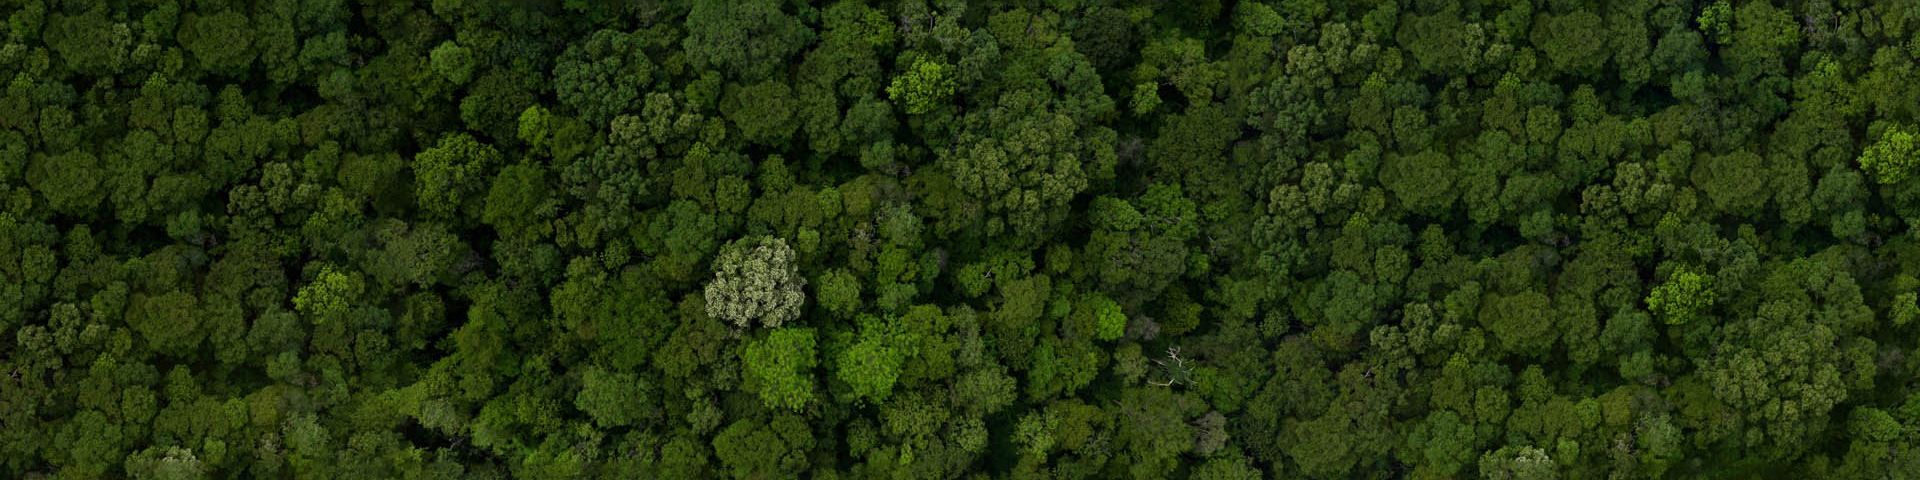 An arial view of a densely wooded forest.